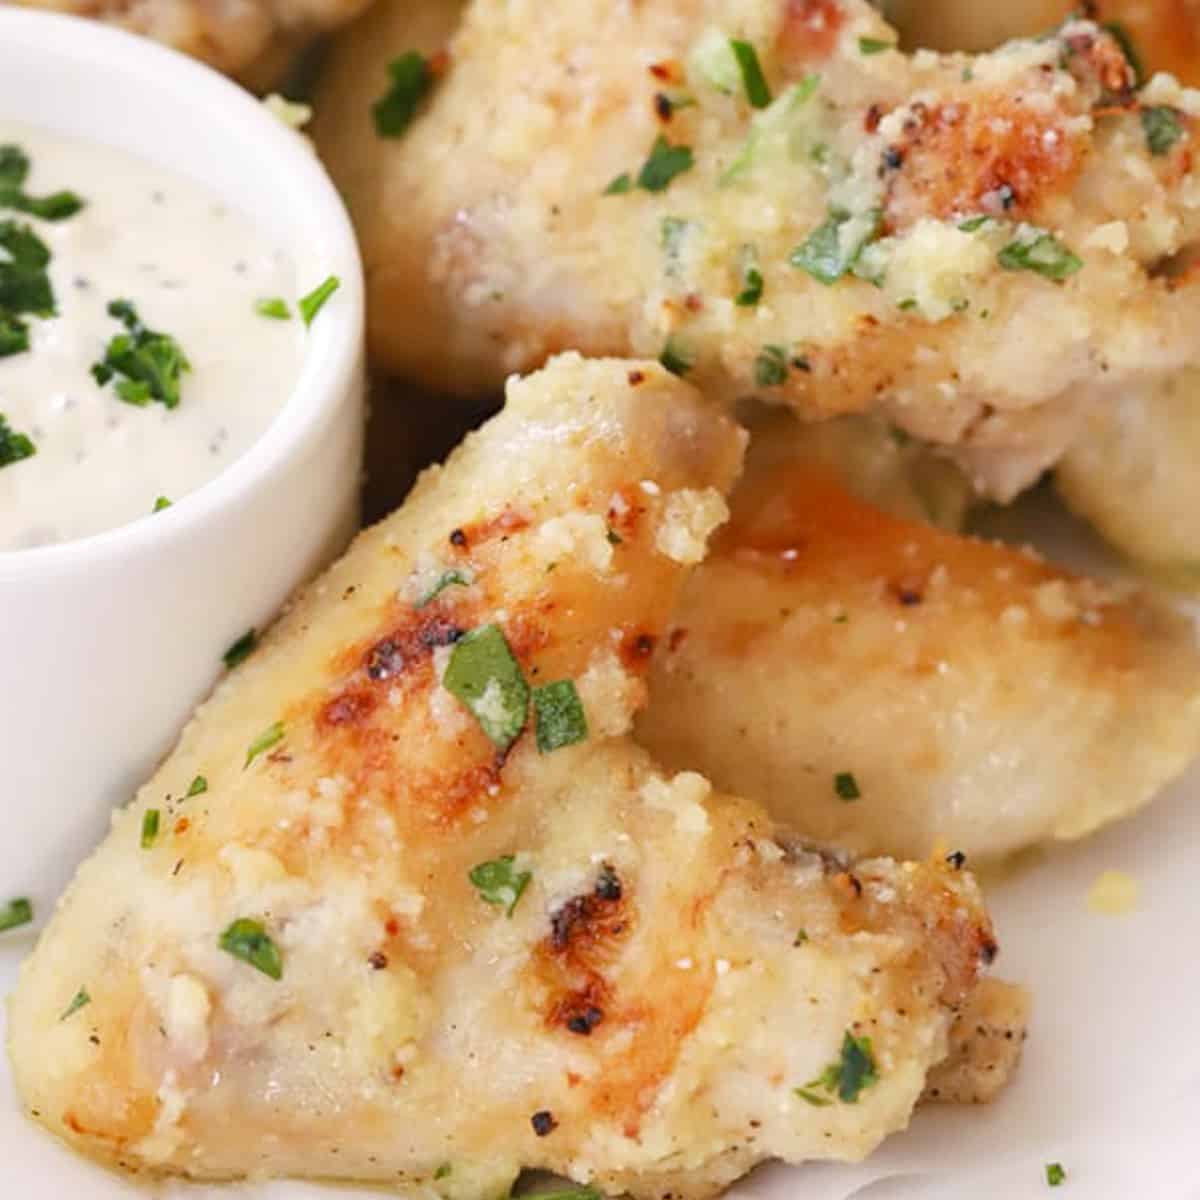 baked Garlic Parmesan chicken wings on a serving platter with a side bowl of dipping sauce, garlic parmesan wings recipe.